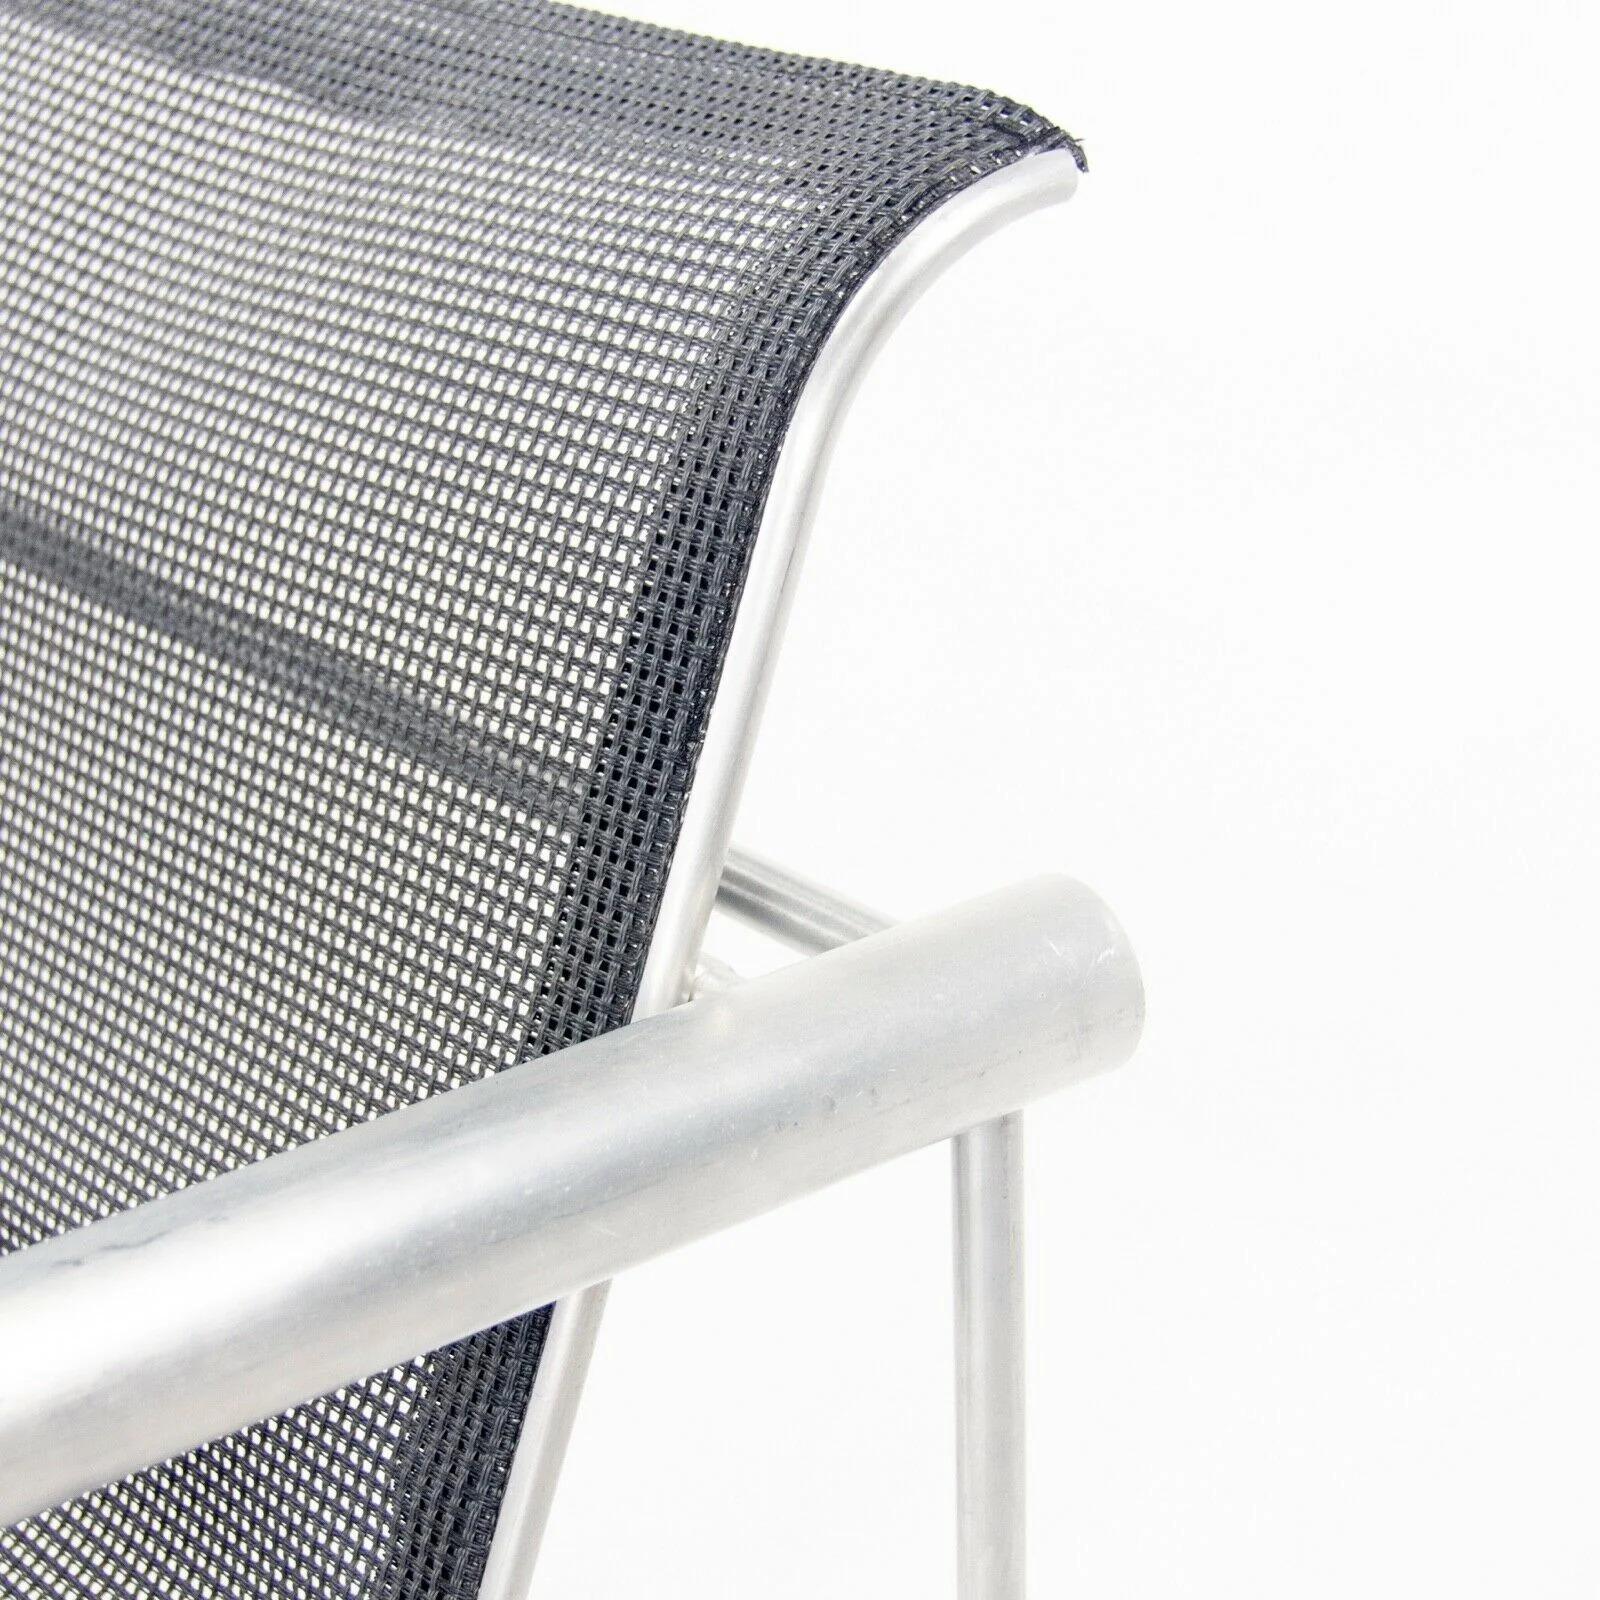 2011 Prototype Richard Schultz Mateo Collection Raw Aluminum & Mesh Dining Chair For Sale 6